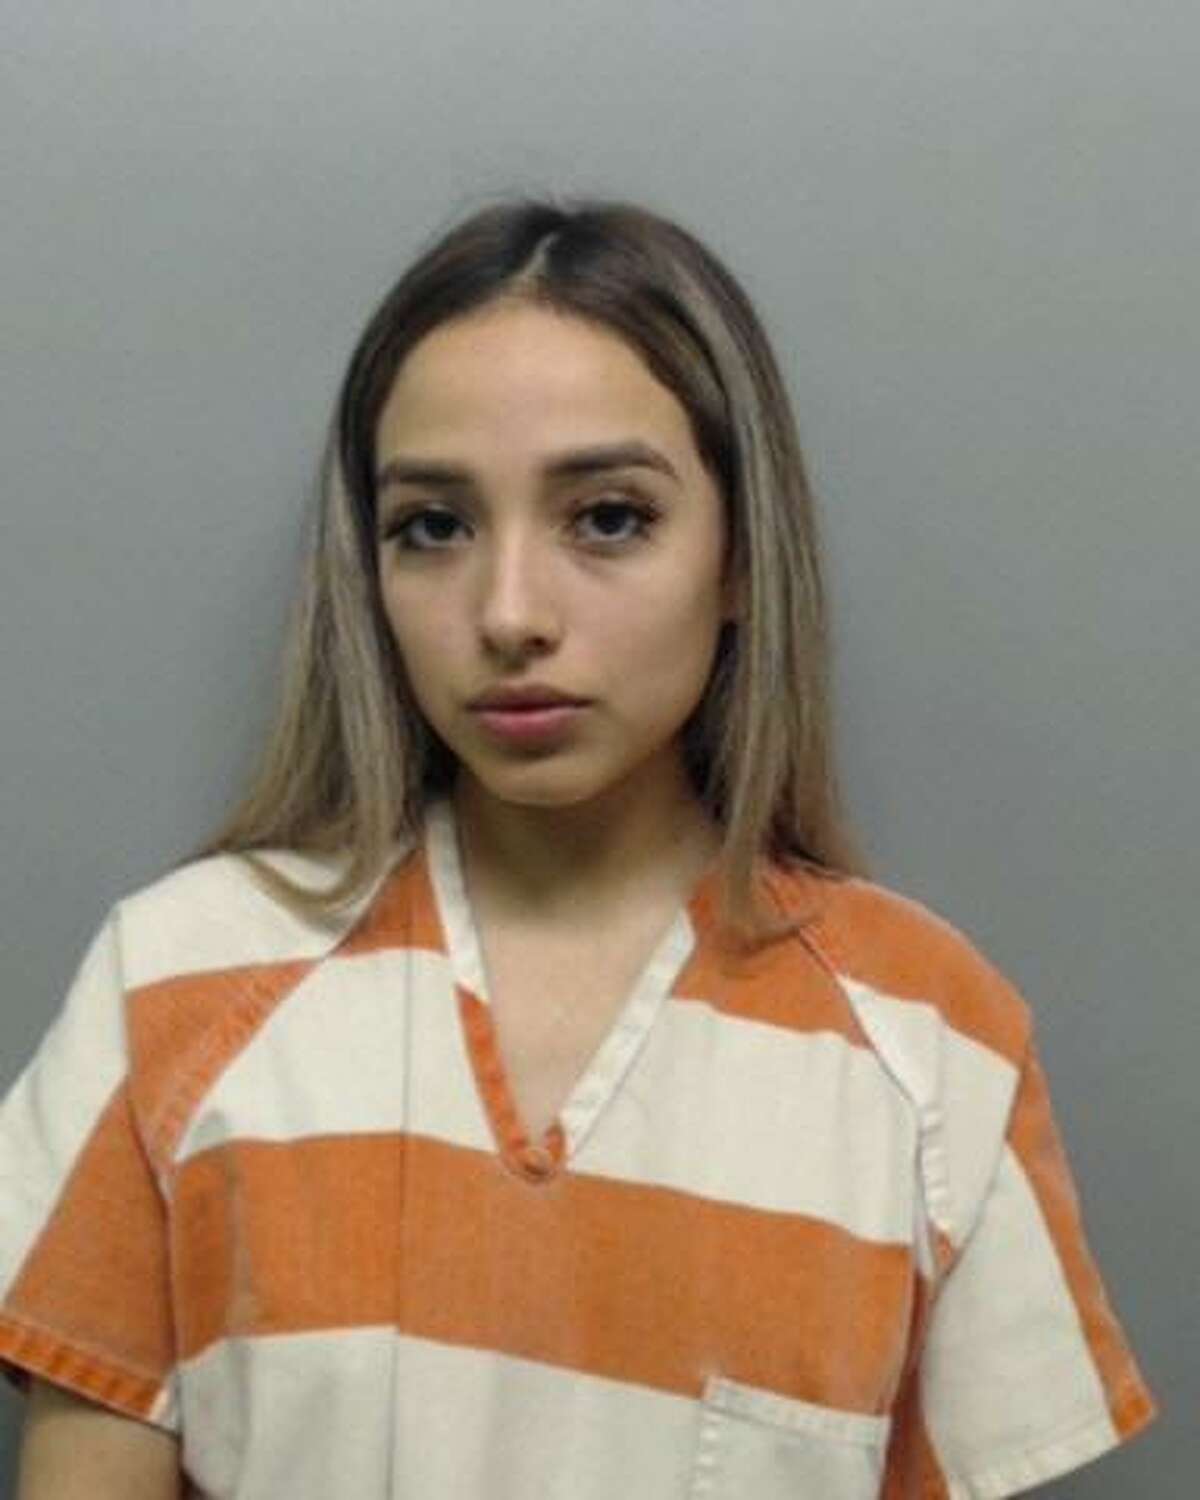 Alyssa Nicole Ollervides, 17, was charged with publish, threat to publish intimate visual material and with sale, distribute or display harmful material to a minor.